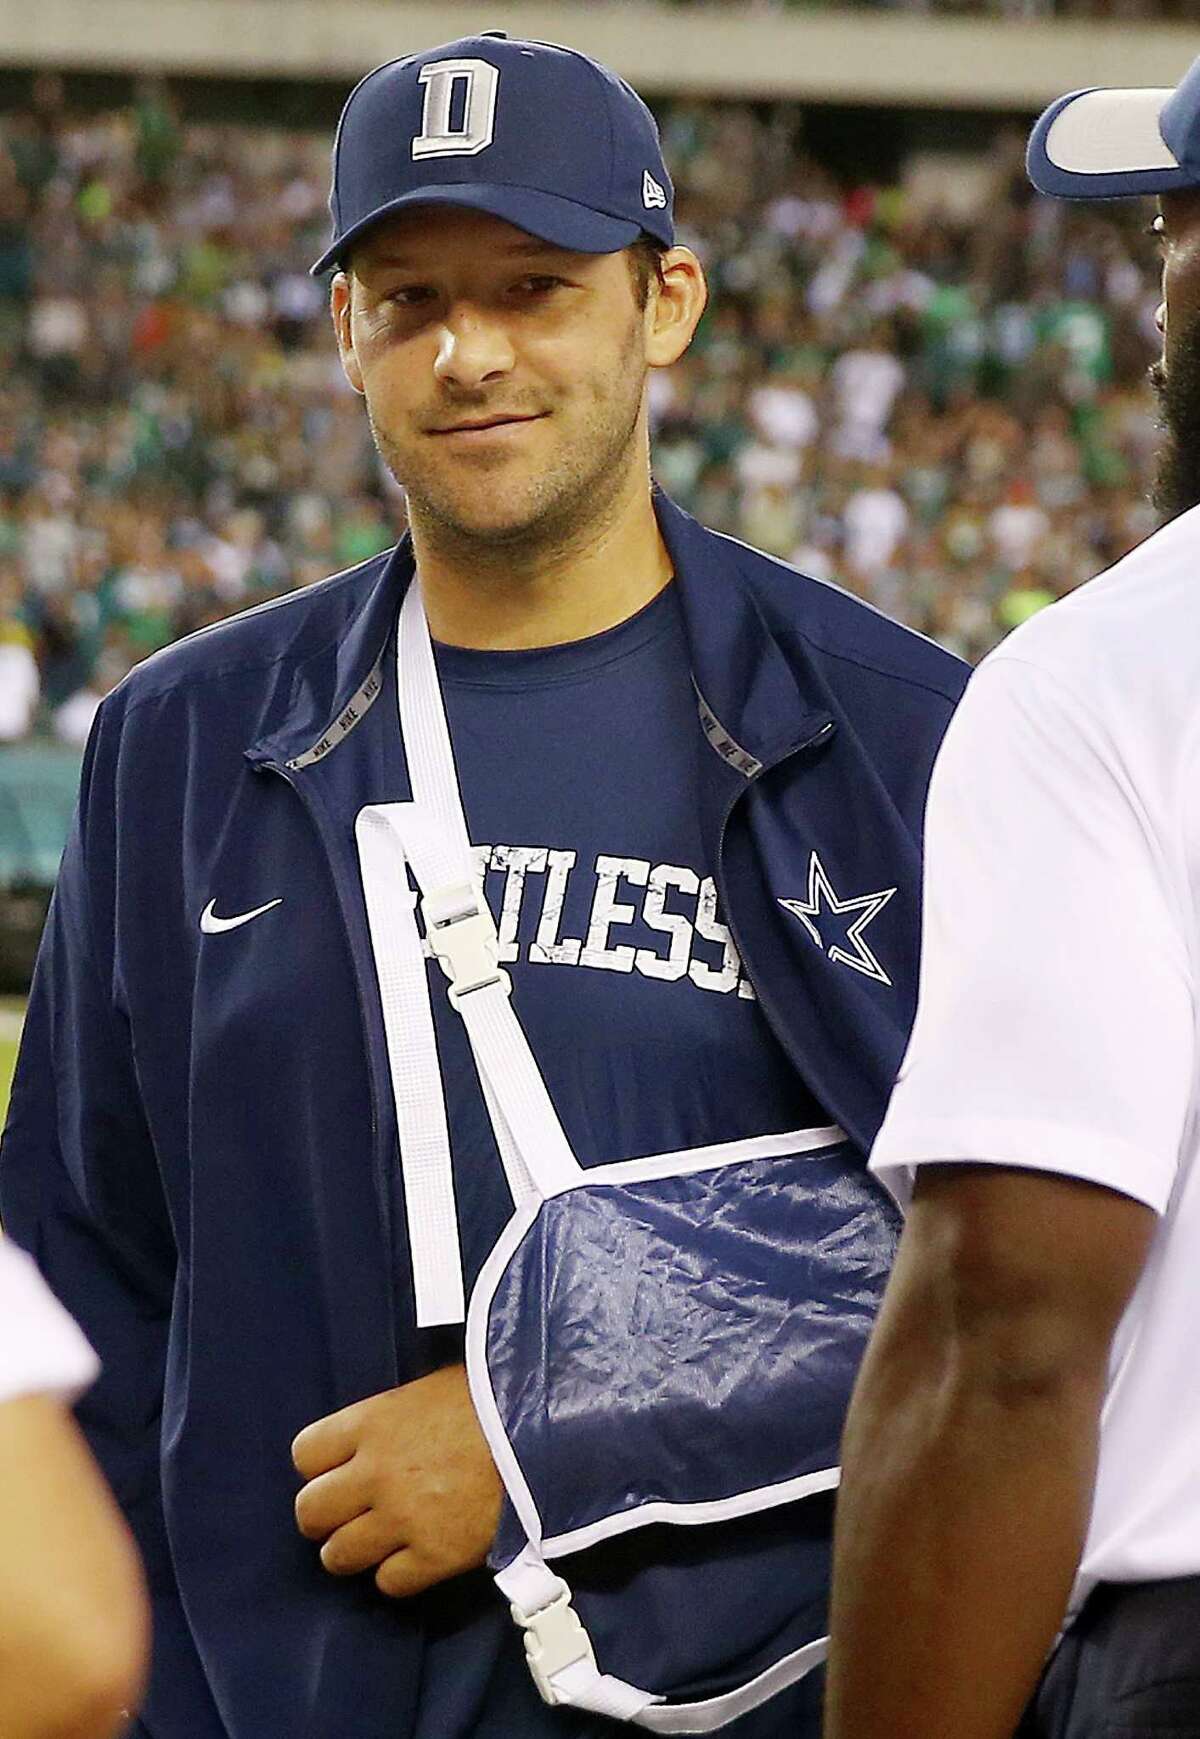 Romo to miss 2-3 months